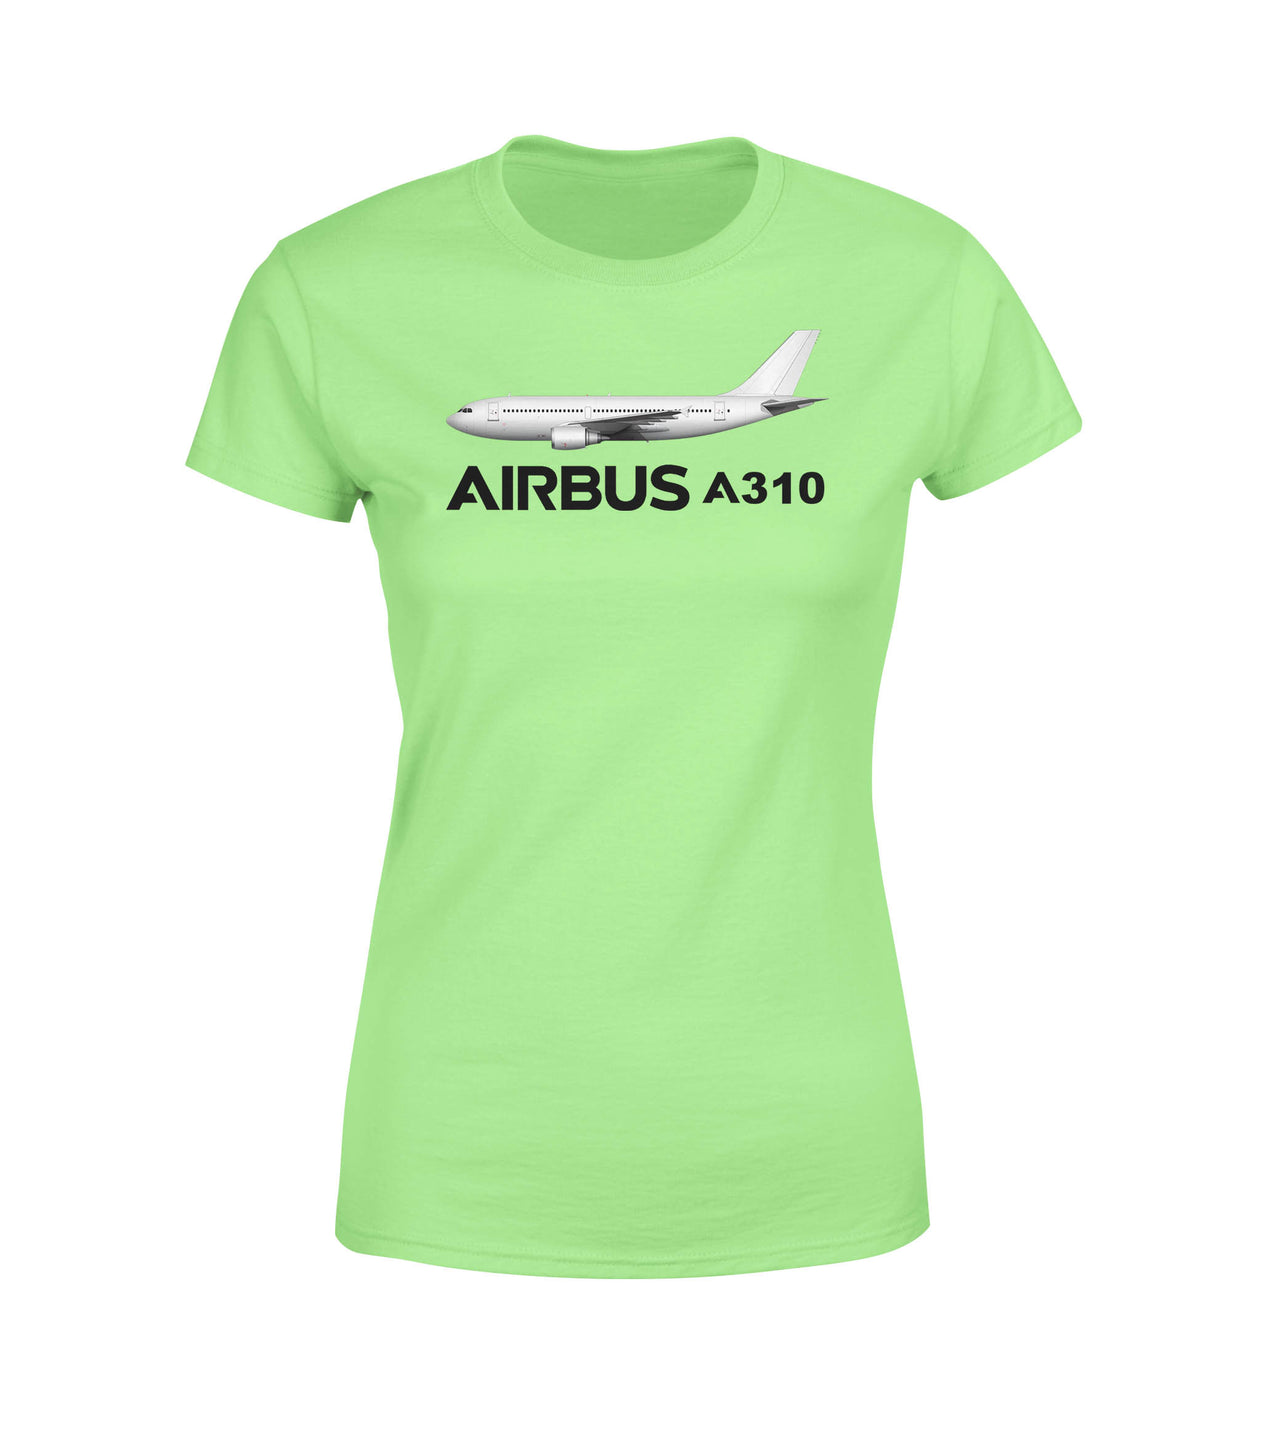 The Airbus A310 Designed Women T-Shirts